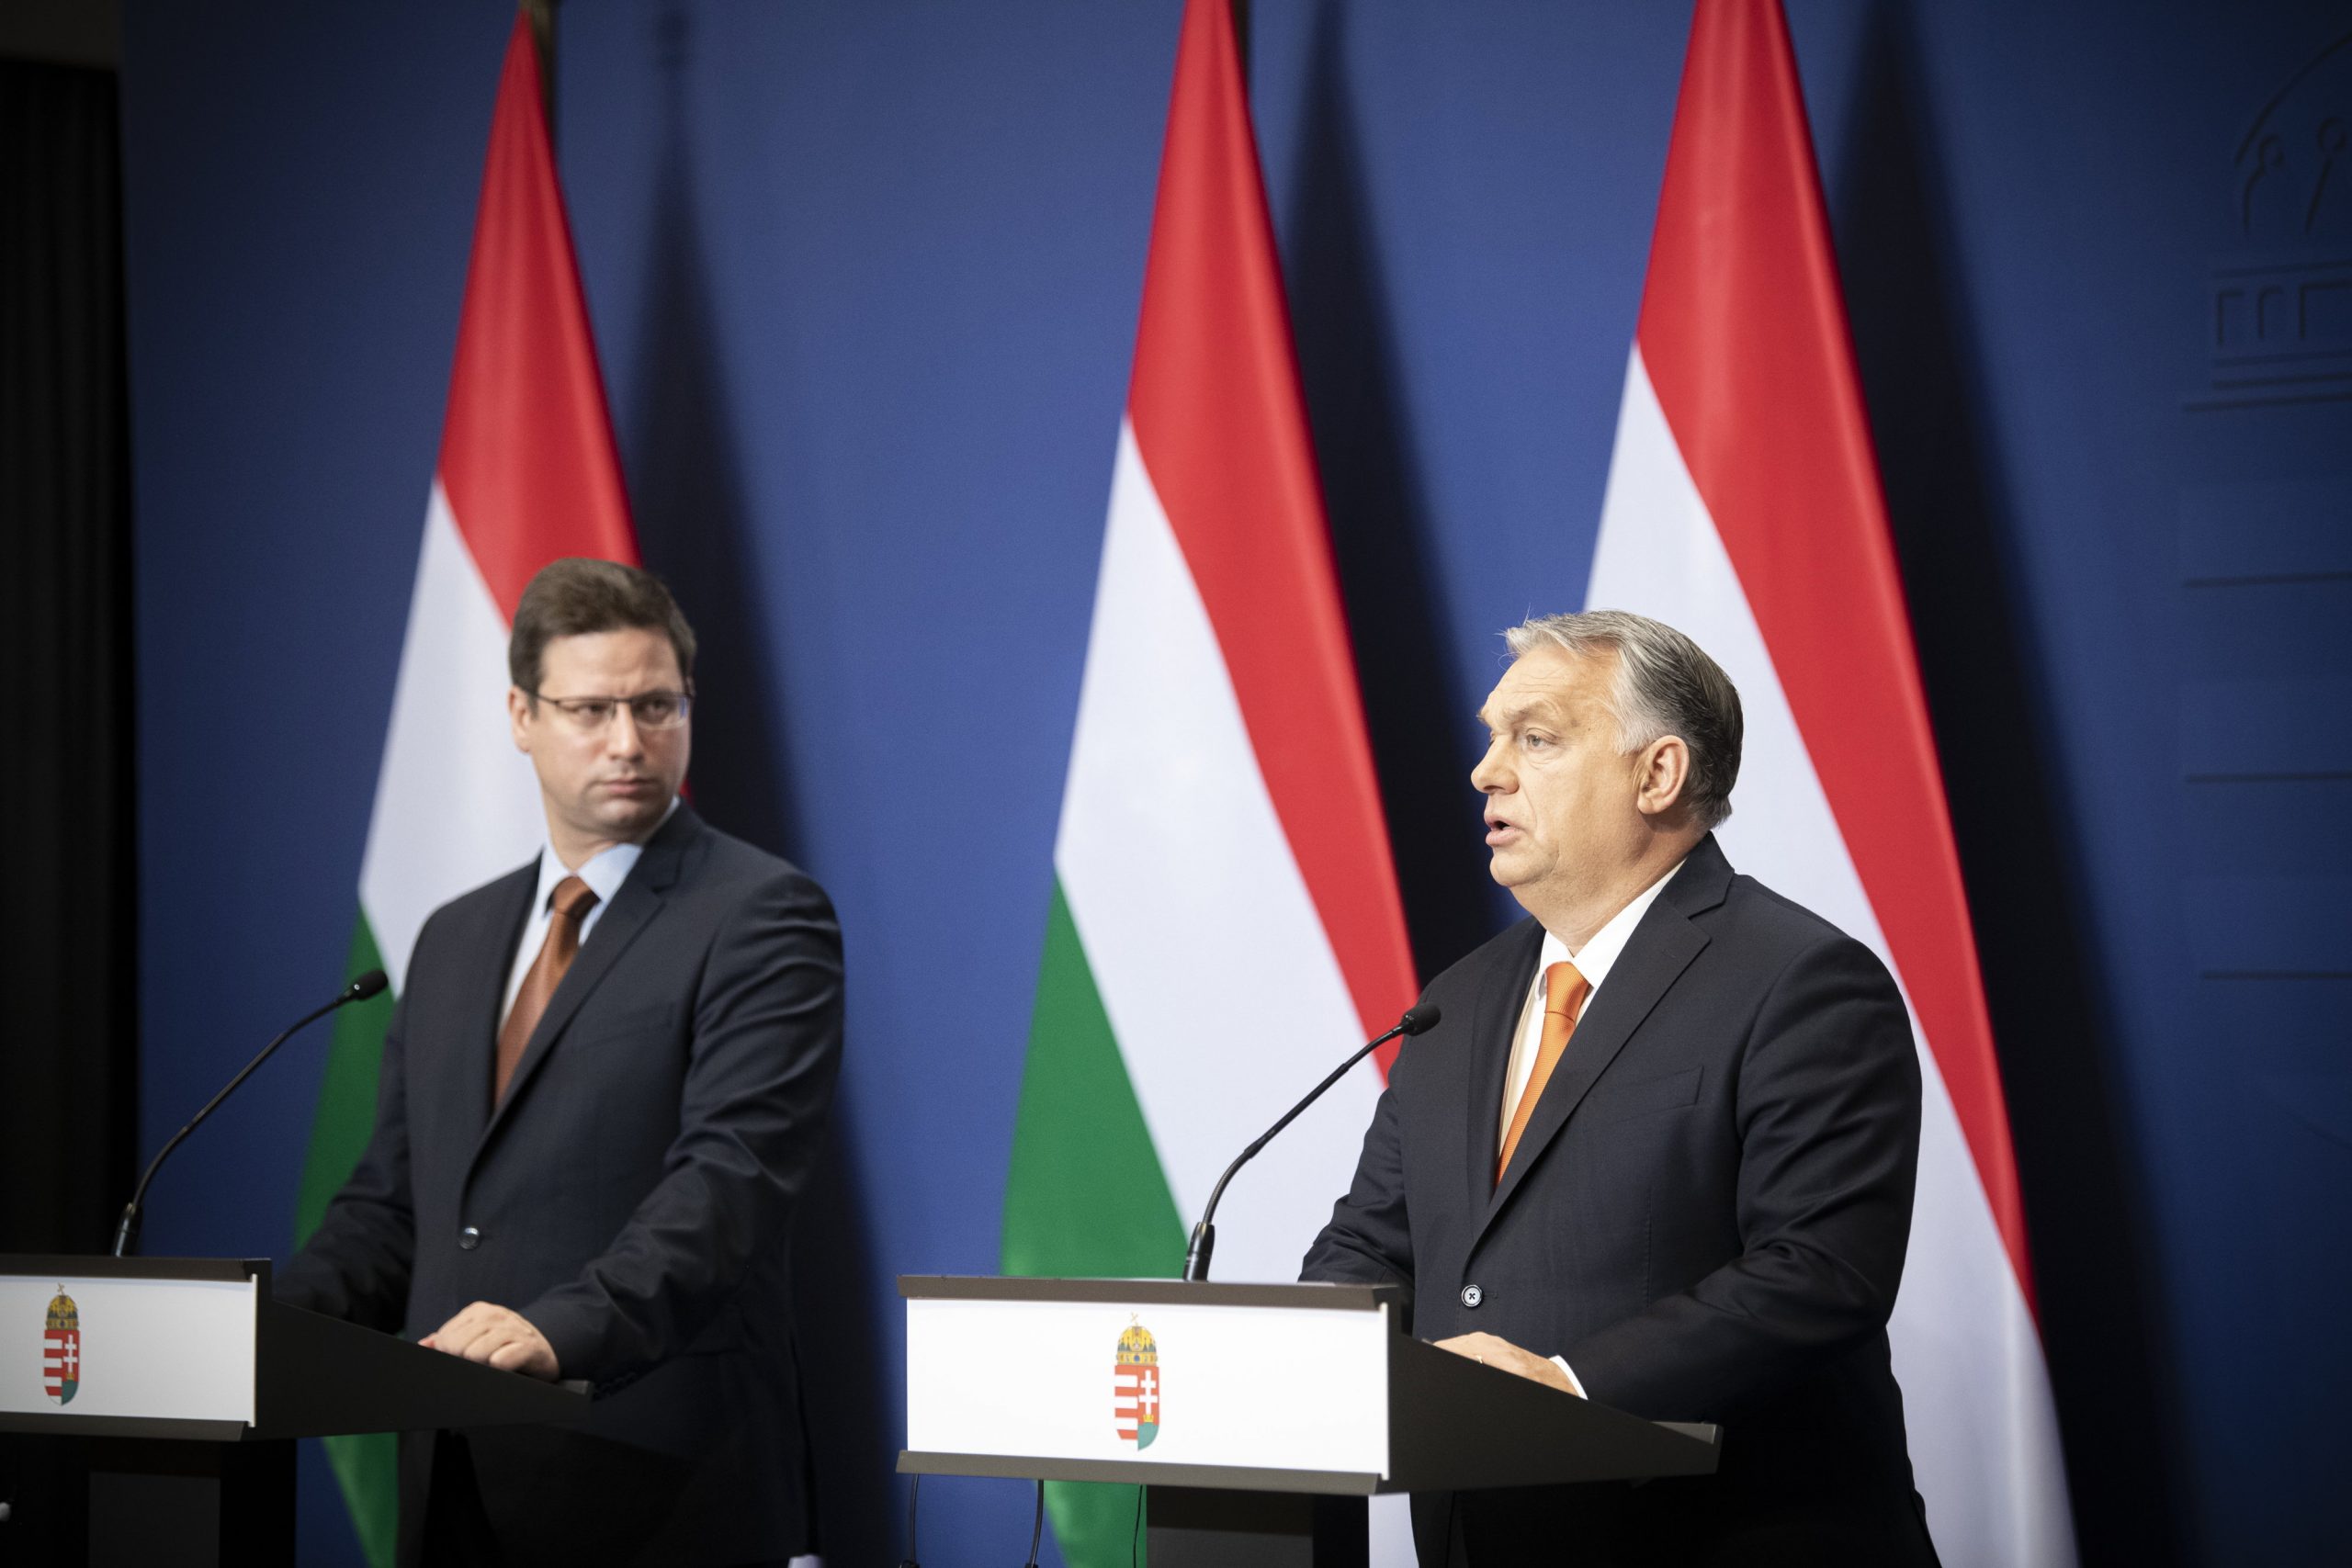 PM Orbán on Mandatory Vaccination: 'Convincing gets you closer to people's minds and hearts than giving orders'